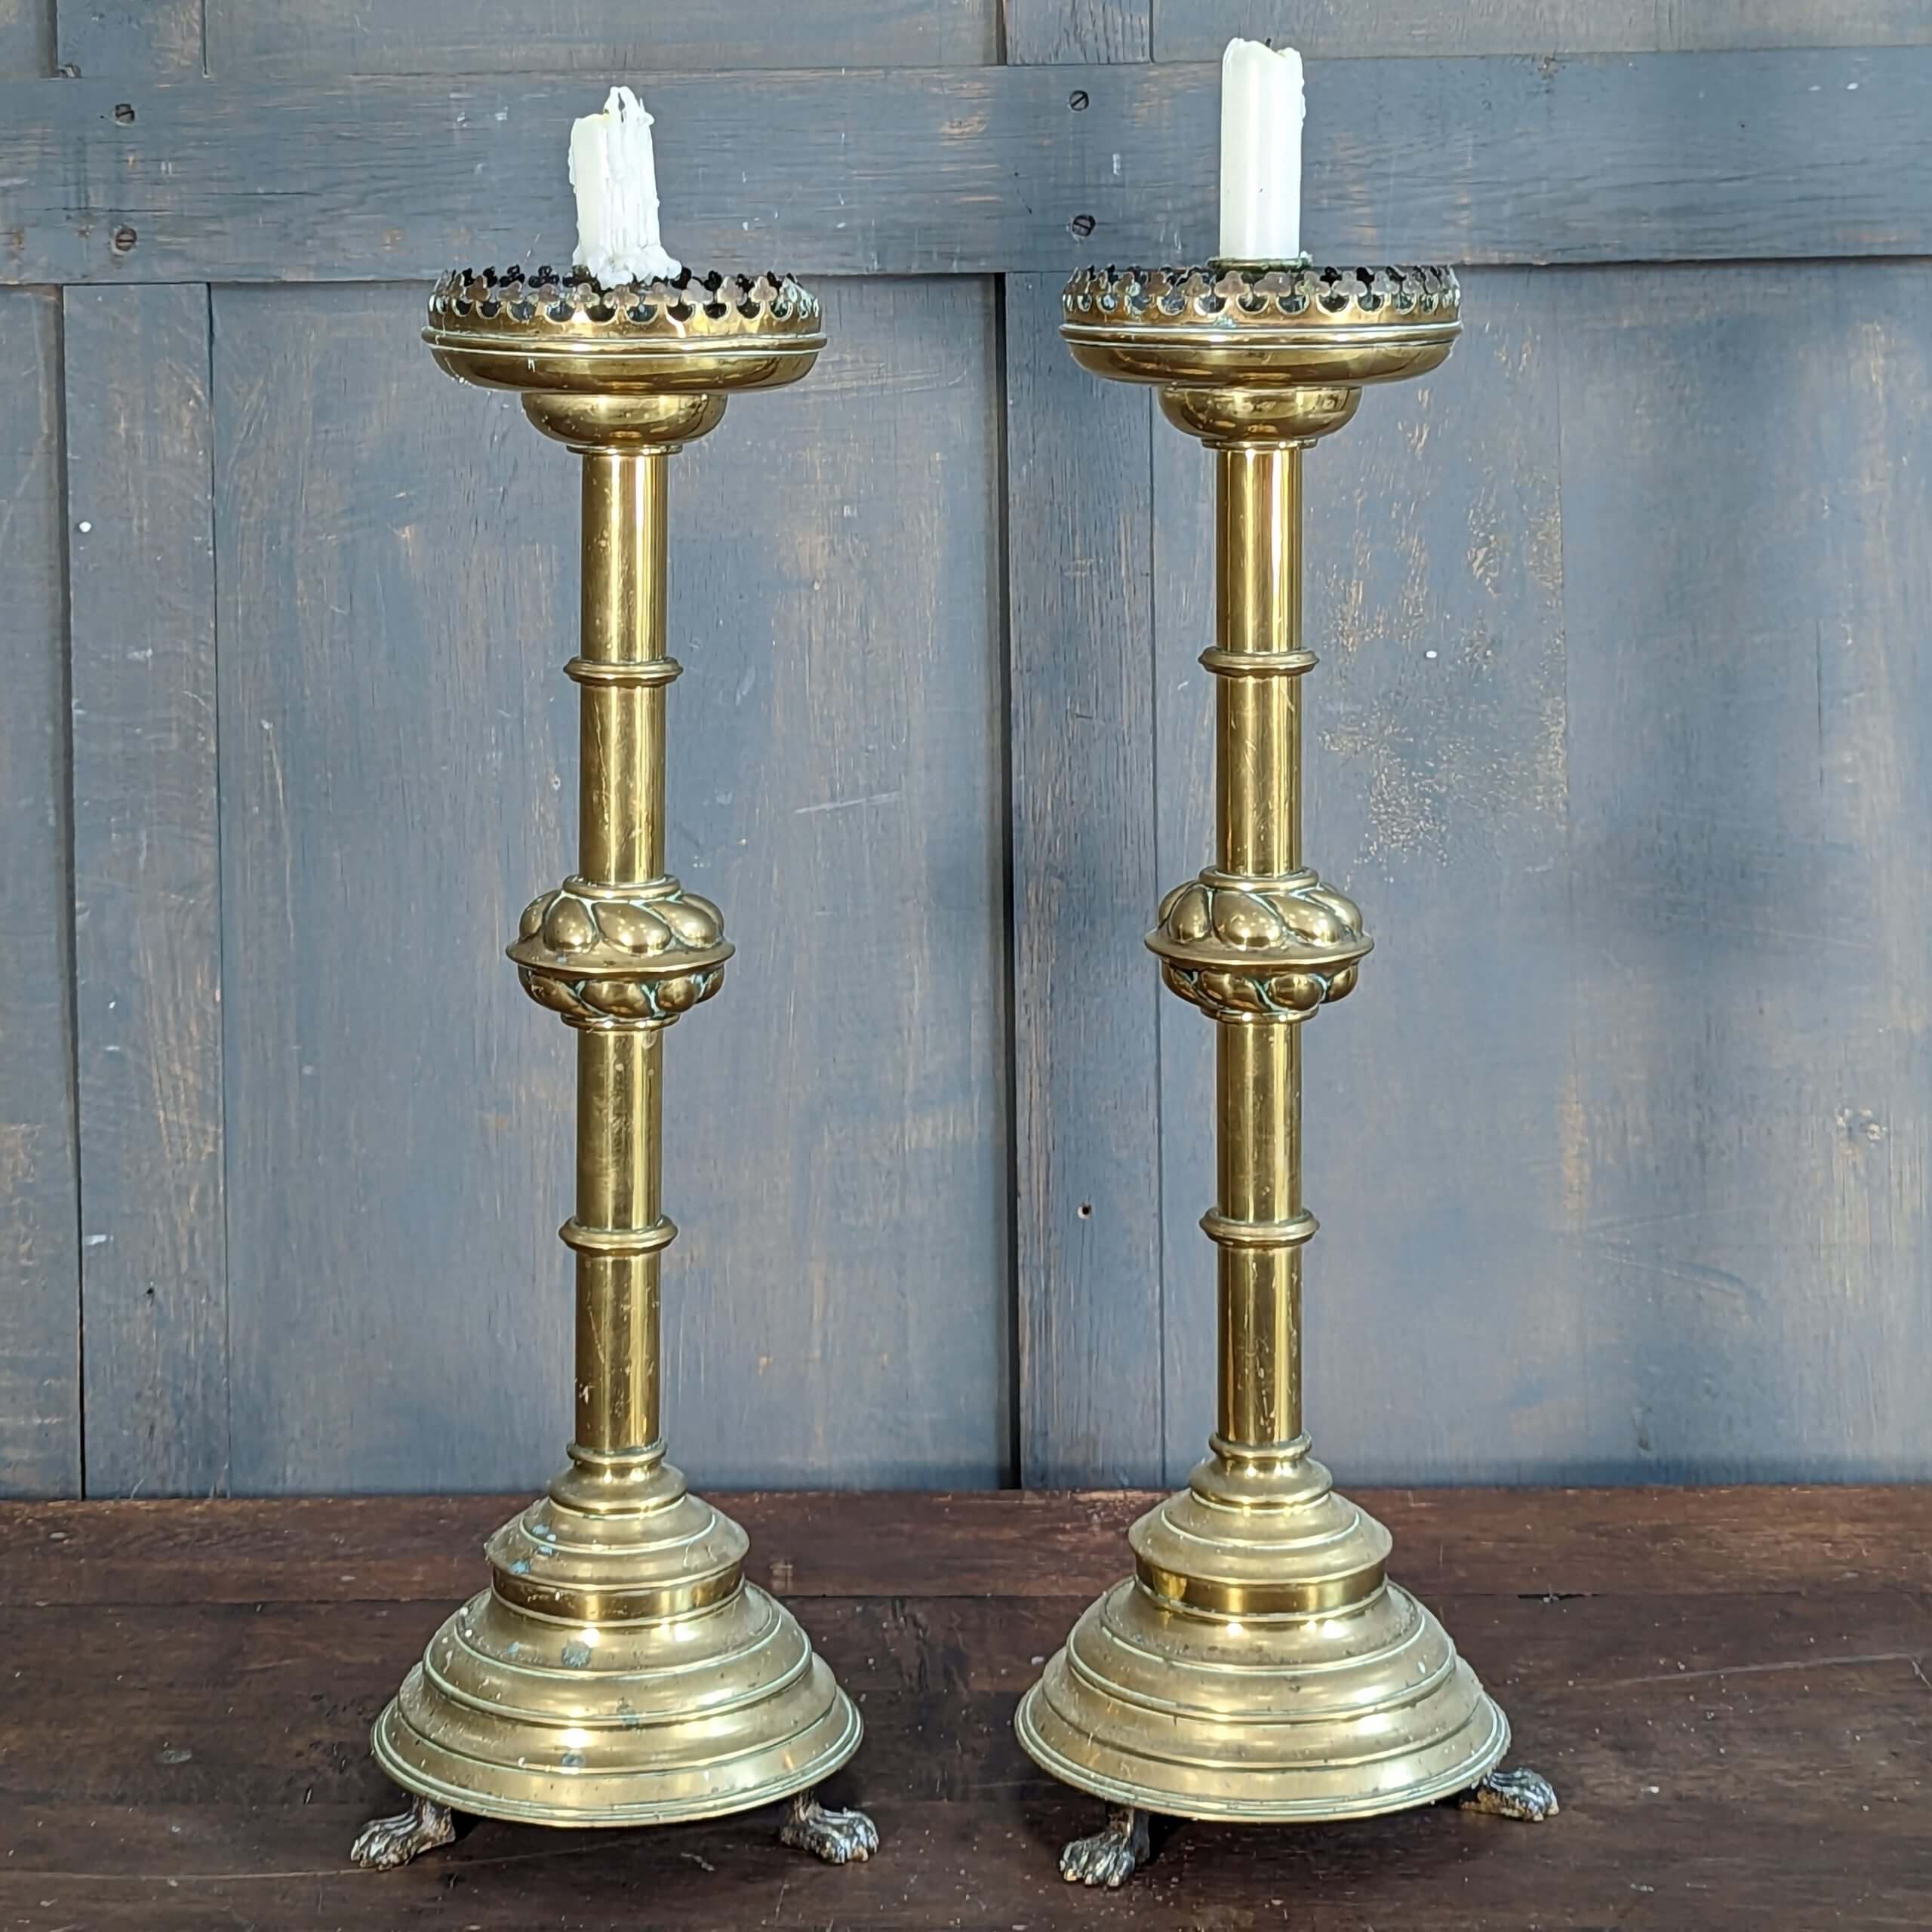 Tall Antique Brass Candle Holder